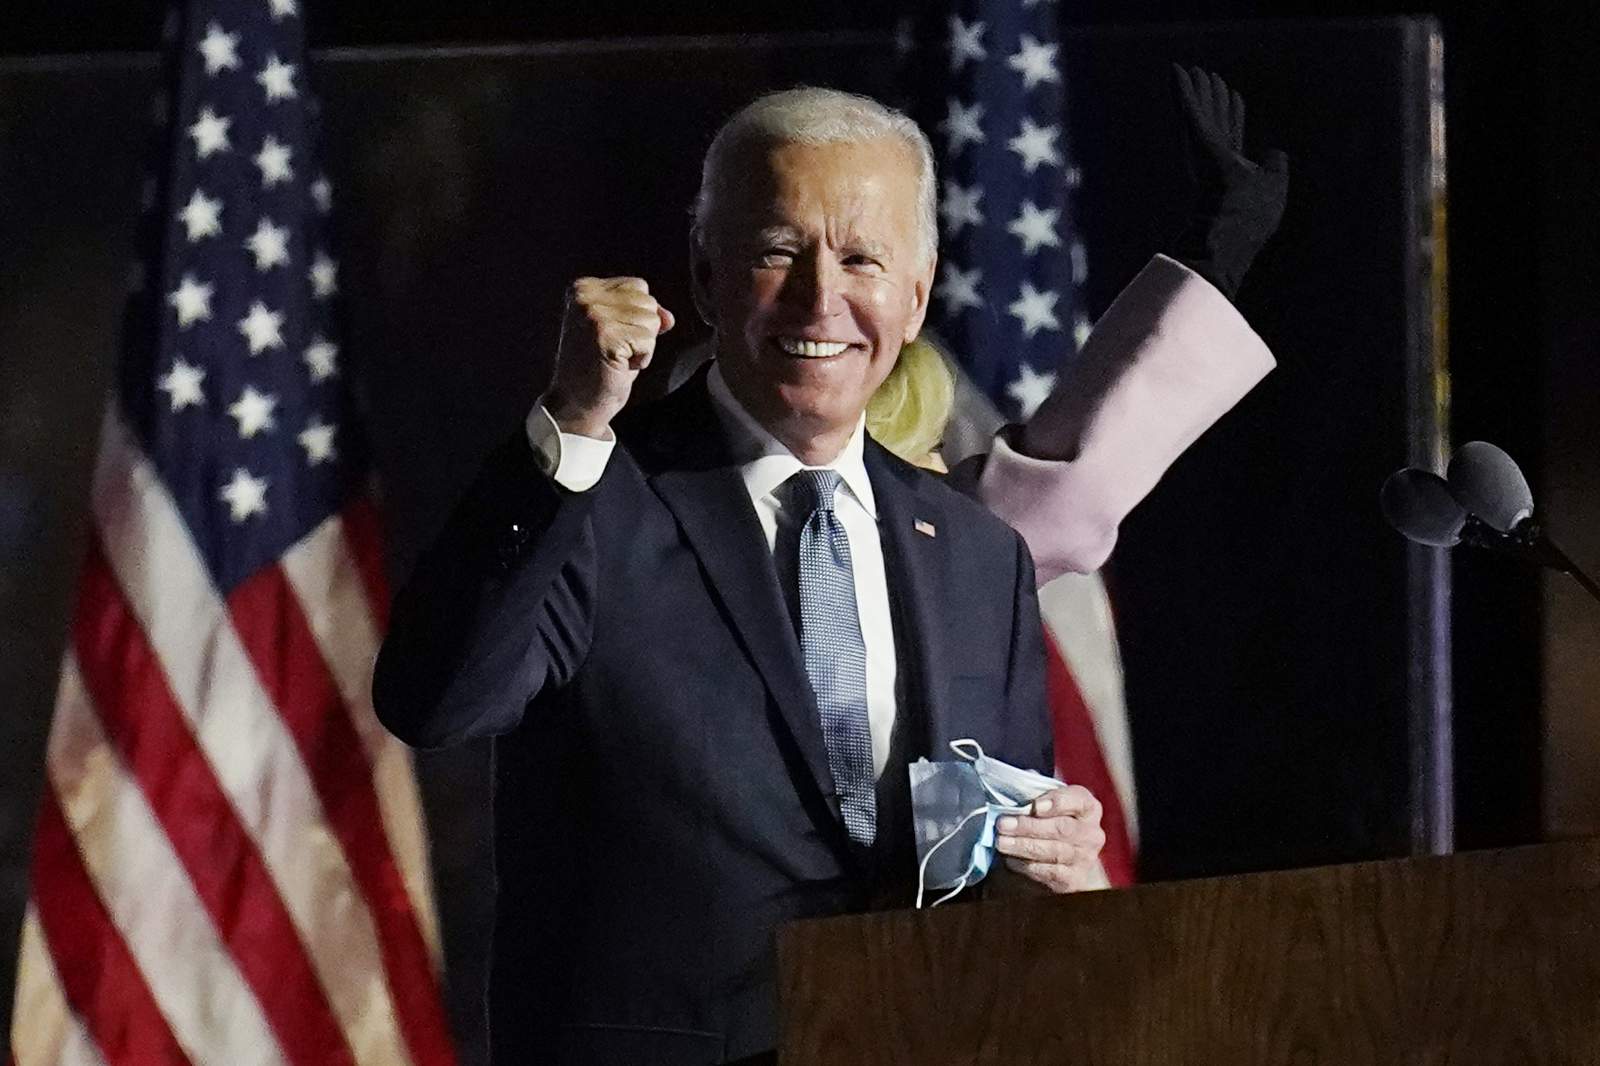 The Latest: Biden begins Election Day visiting son's grave